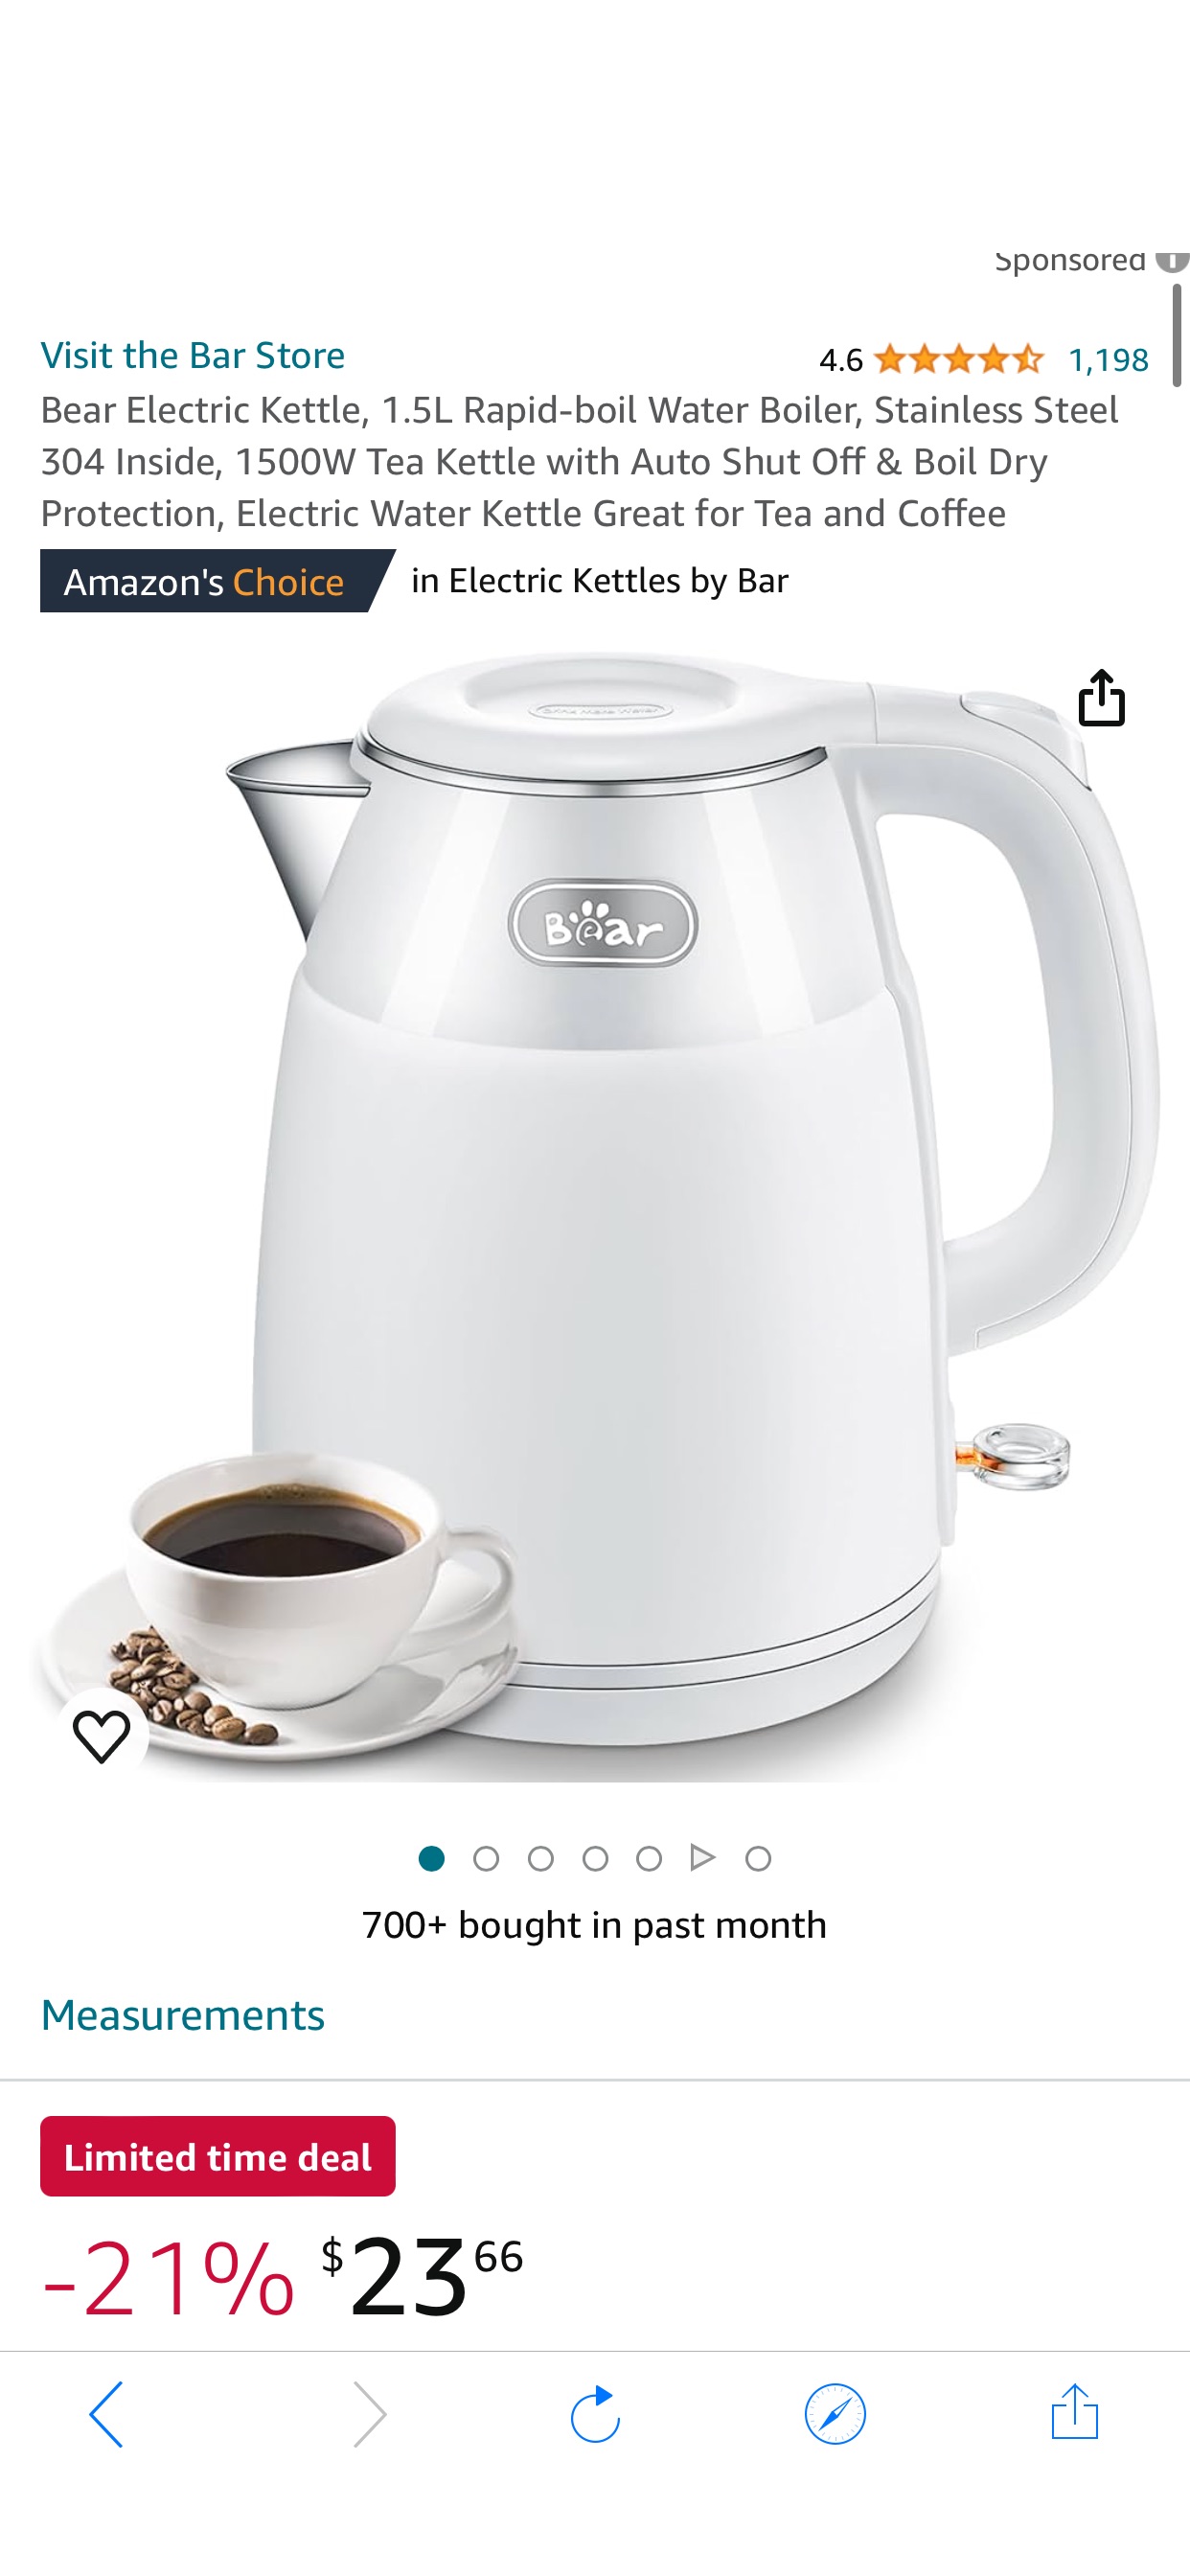 Amazon.com: Bear Electric Kettle, 1.5L Rapid-boil Water Boiler, Stainless Steel 304 Inside, 1500W Tea Kettle with Auto Shut Off & Boil Dry Protection, Electric Water Kettle Great for Tea and Coffee: H